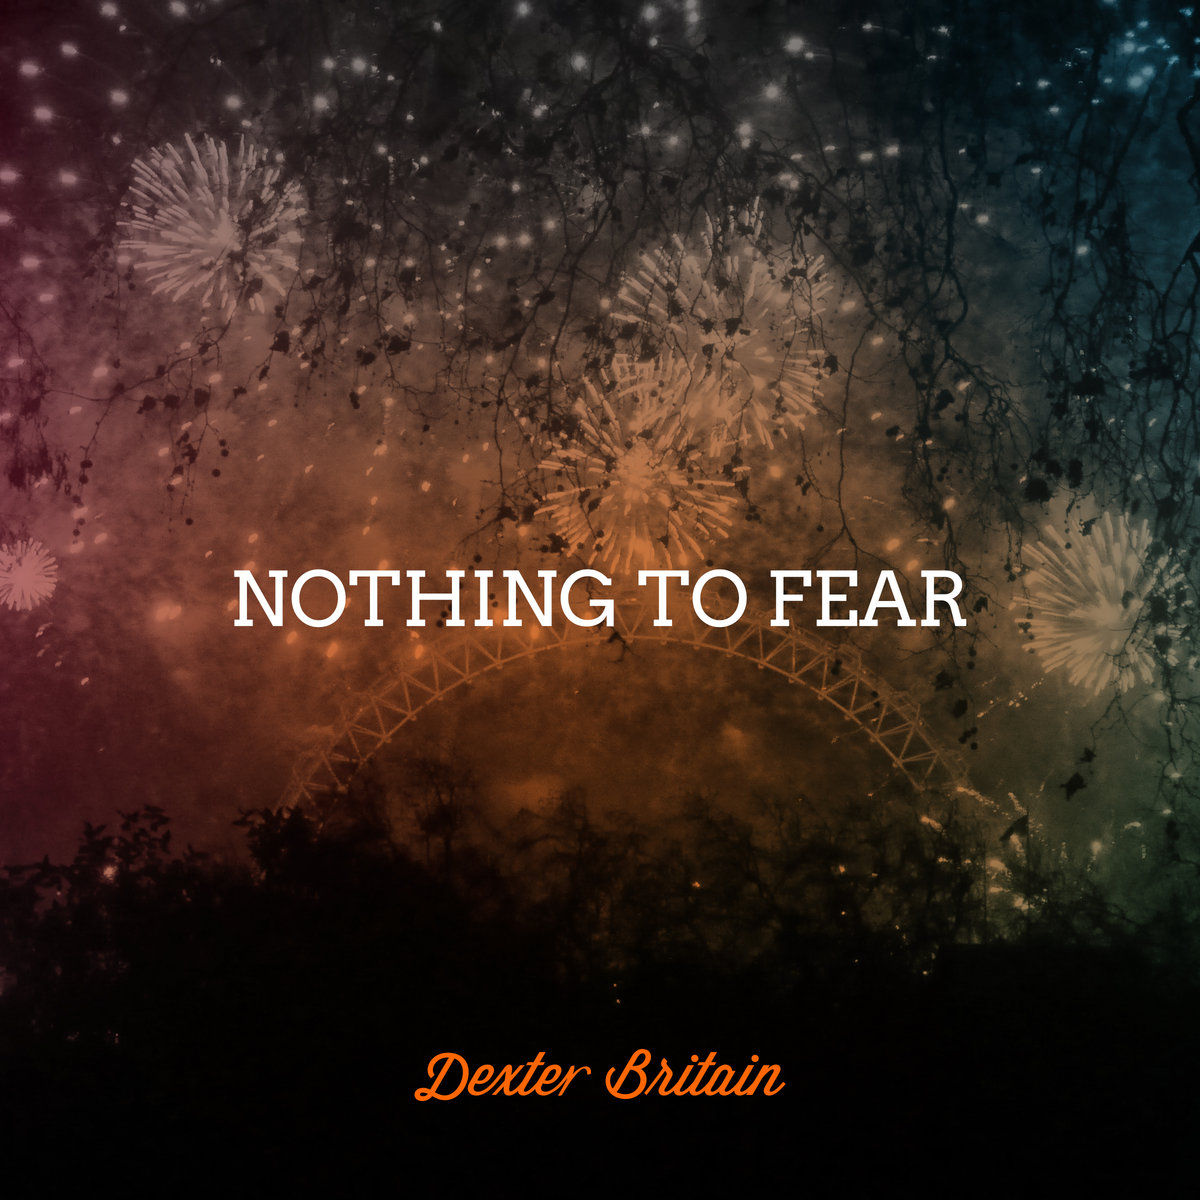 Dexter Britain - Nothing To Fear